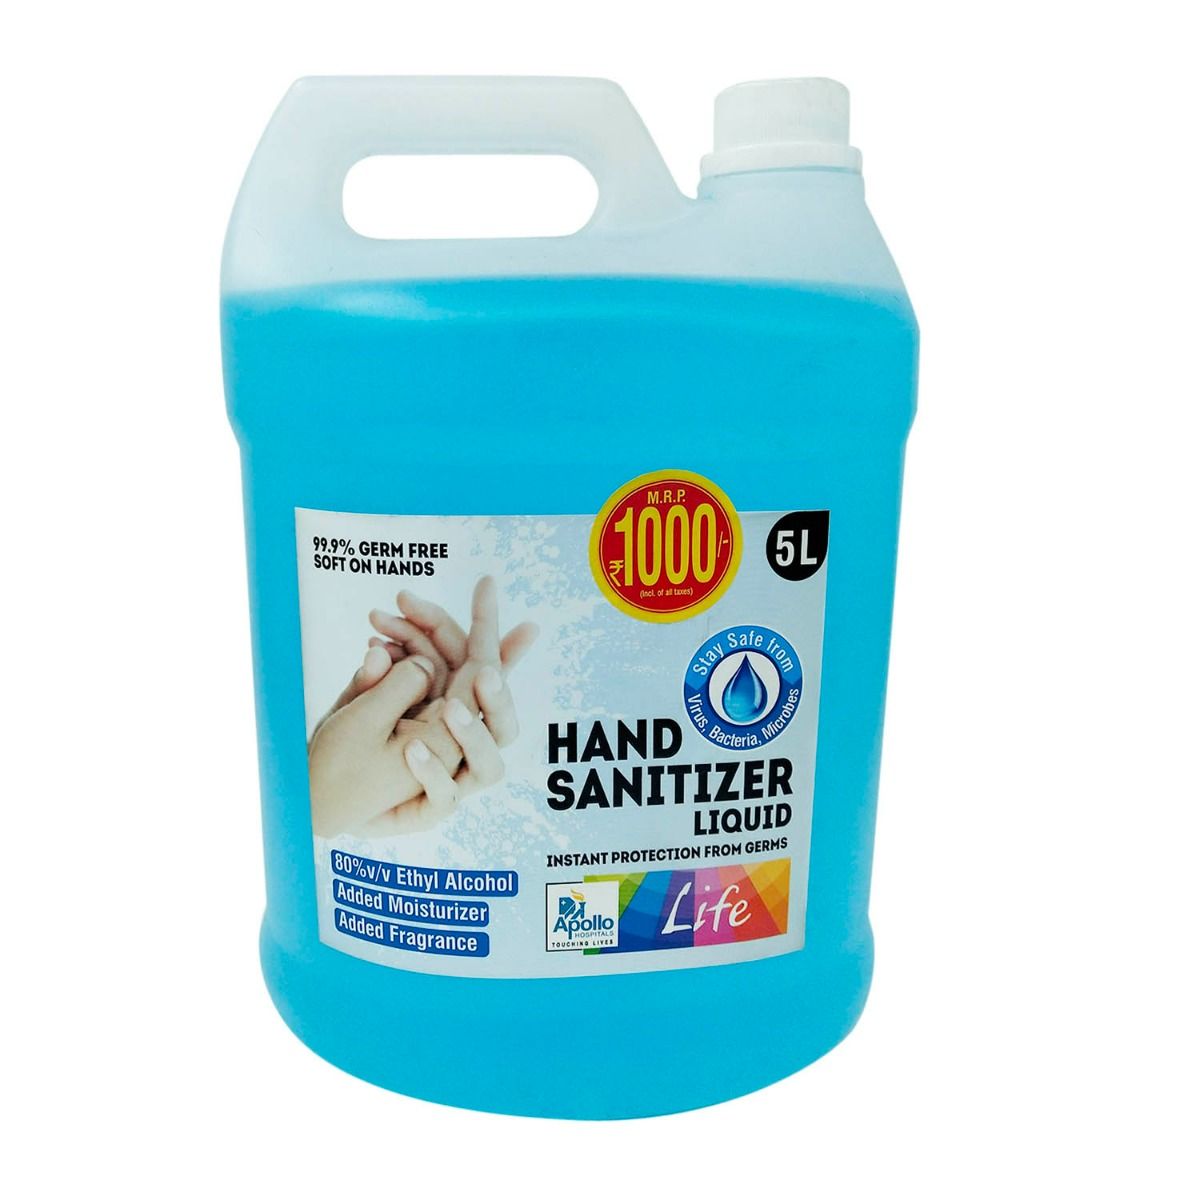 Apollo Life Hand Sanitizer, 5 Litre, Pack of 1 